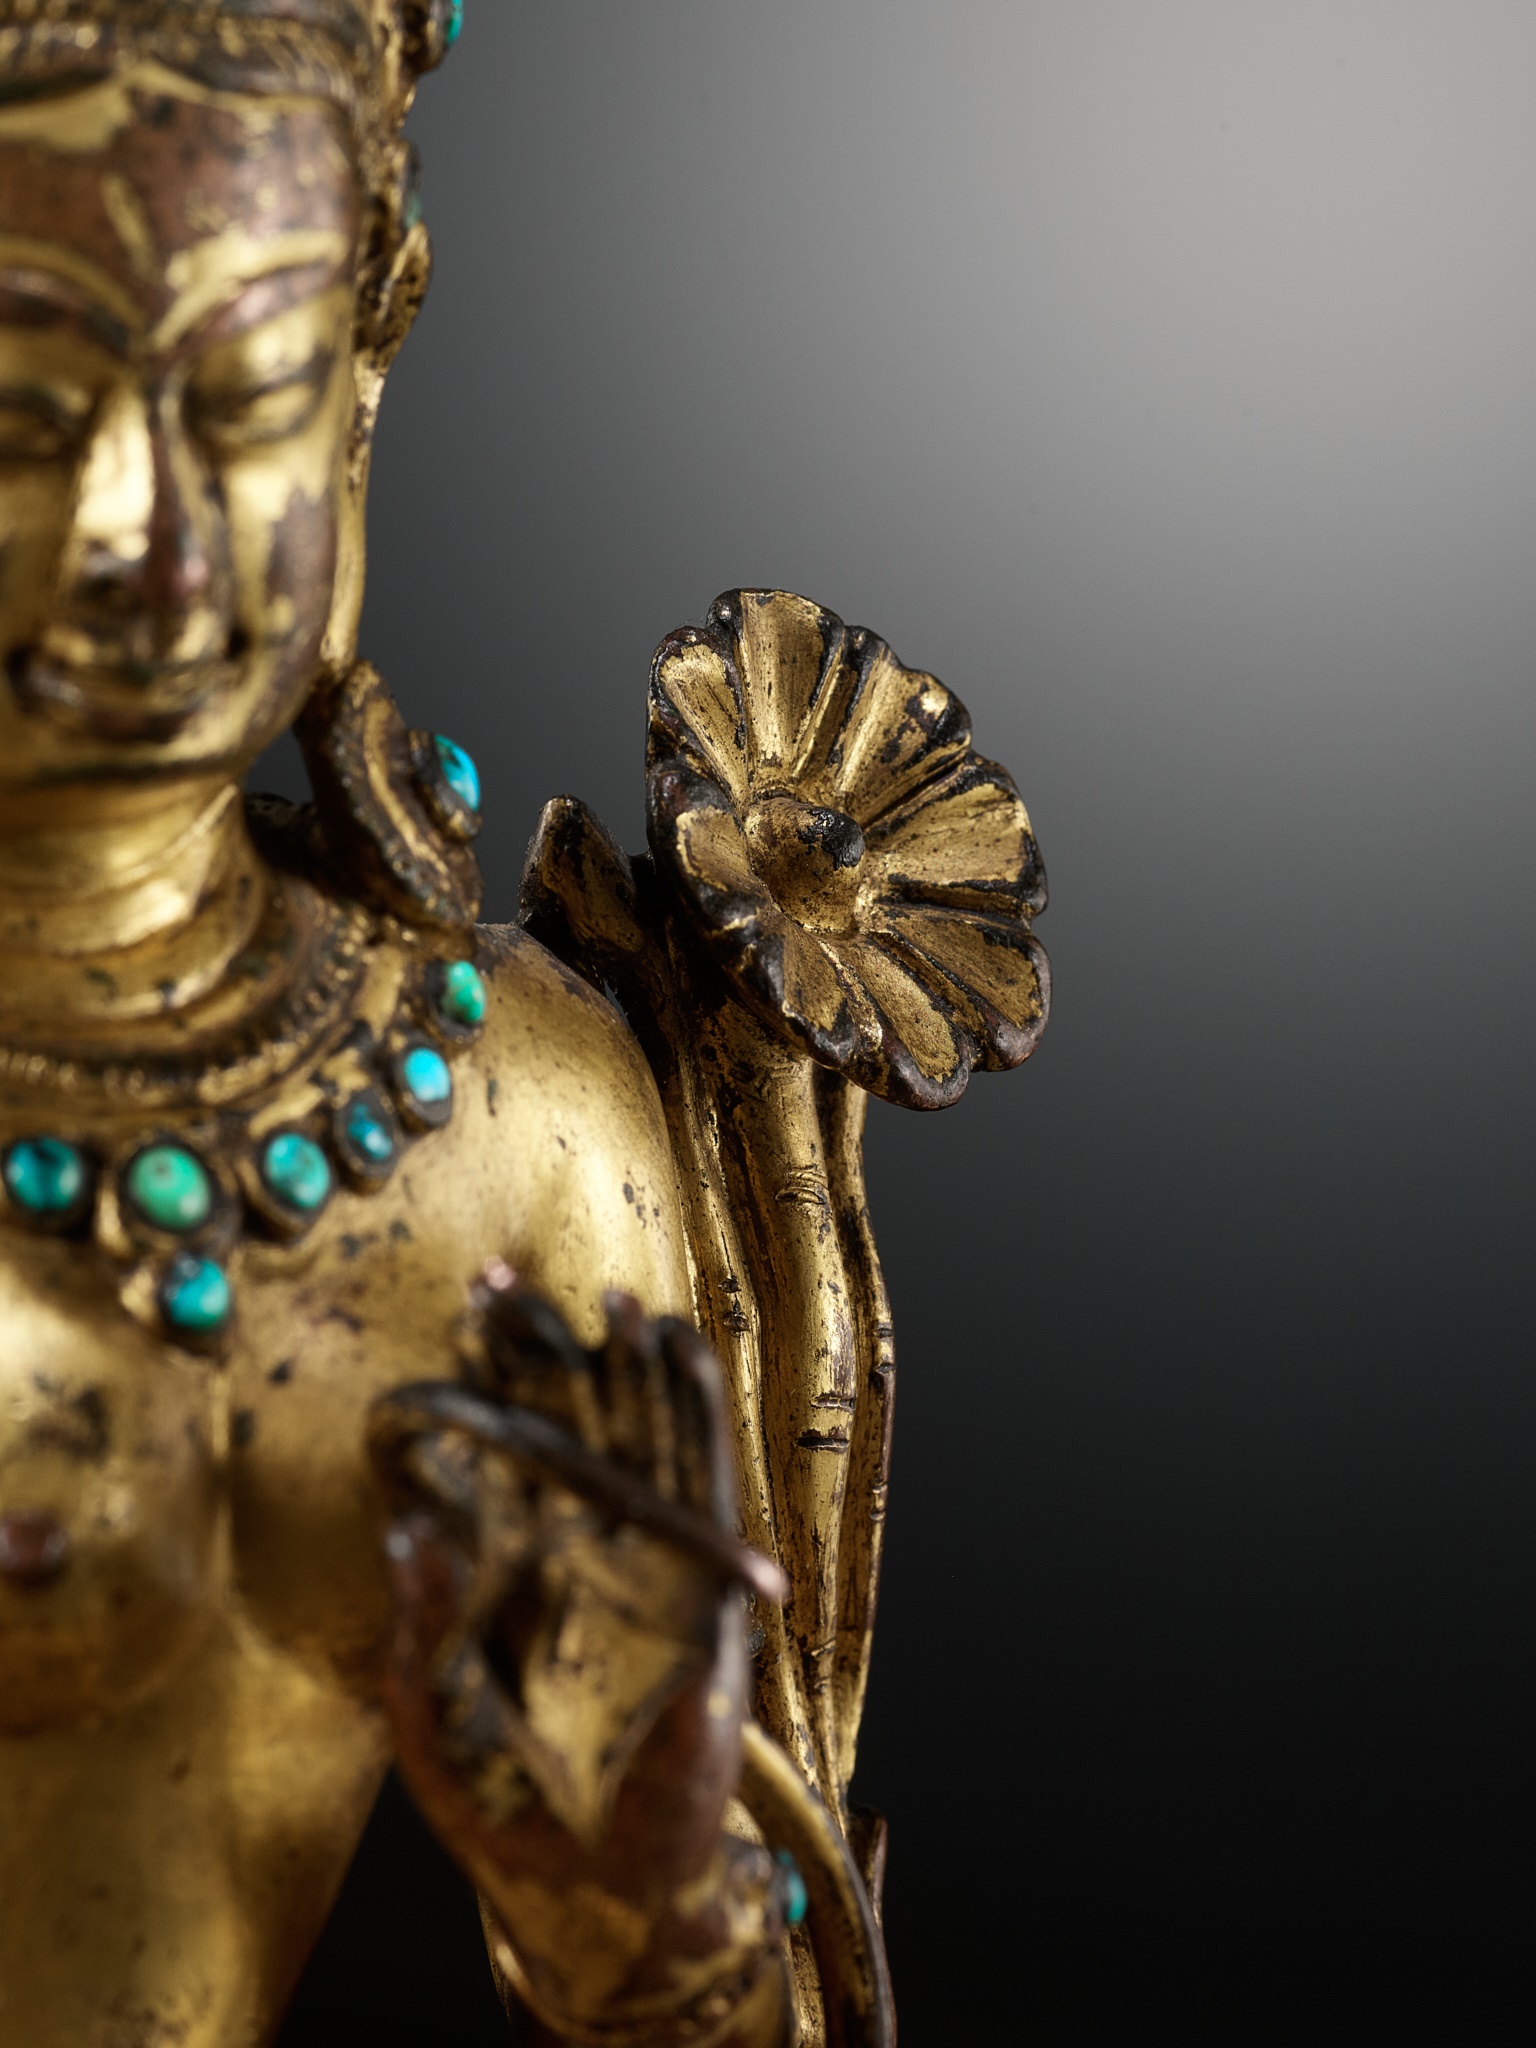 A GILT AND TURQUOISE-INLAID COPPER ALLOY FIGURE OF GREEN TARA, DENSATIL STYLE, TIBET, 14TH CENTURY - Image 2 of 16